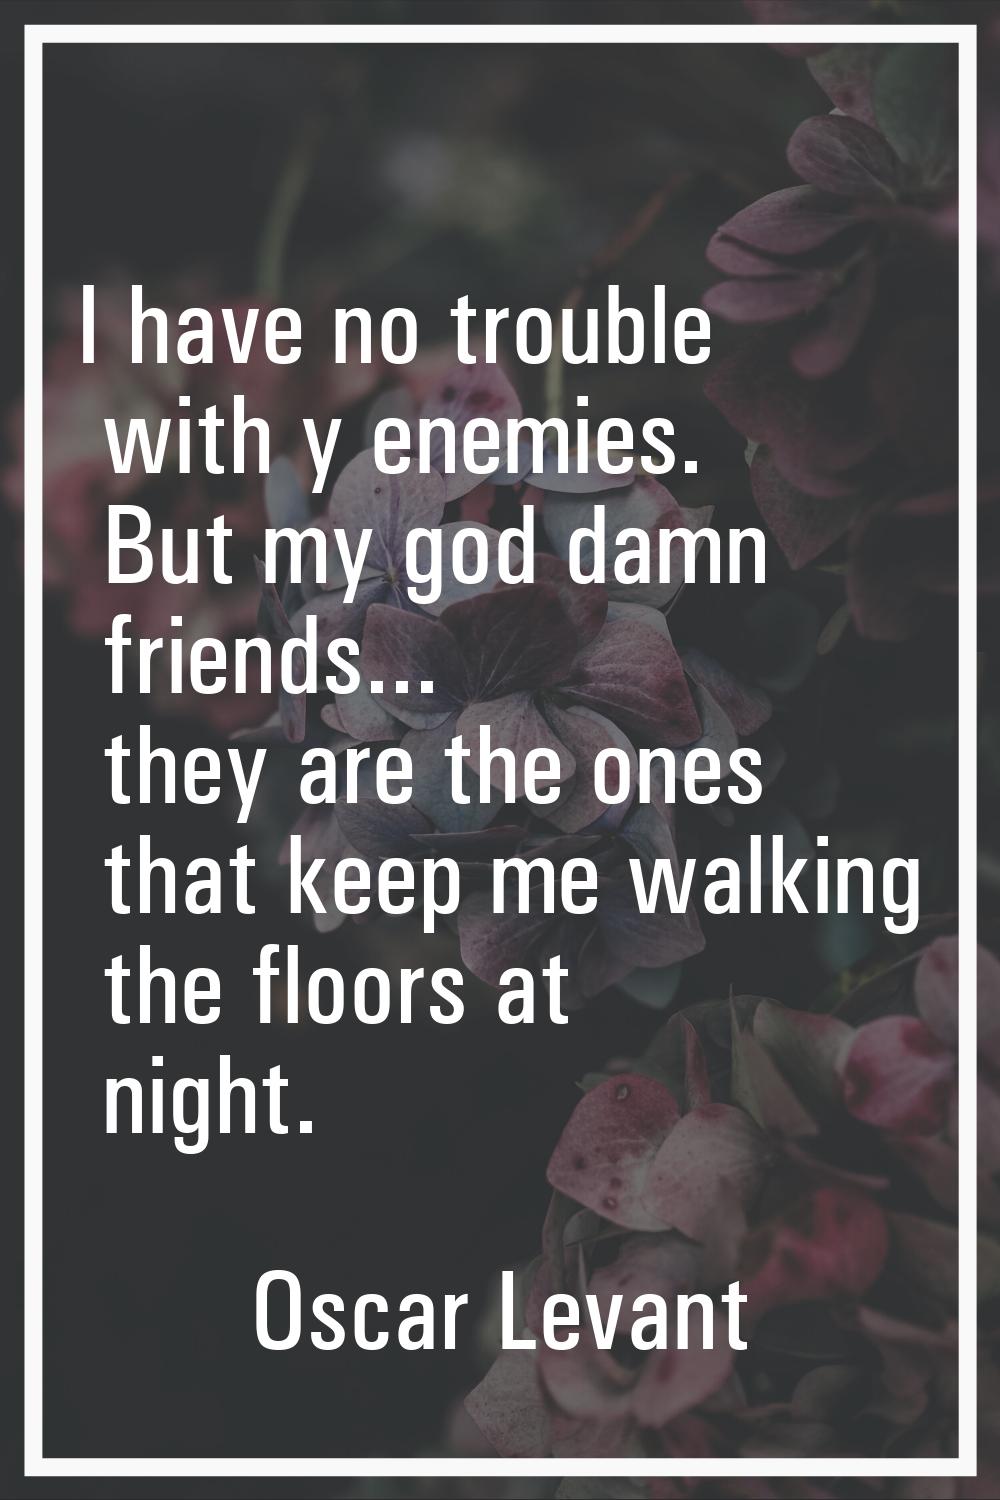 I have no trouble with y enemies. But my god damn friends... they are the ones that keep me walking